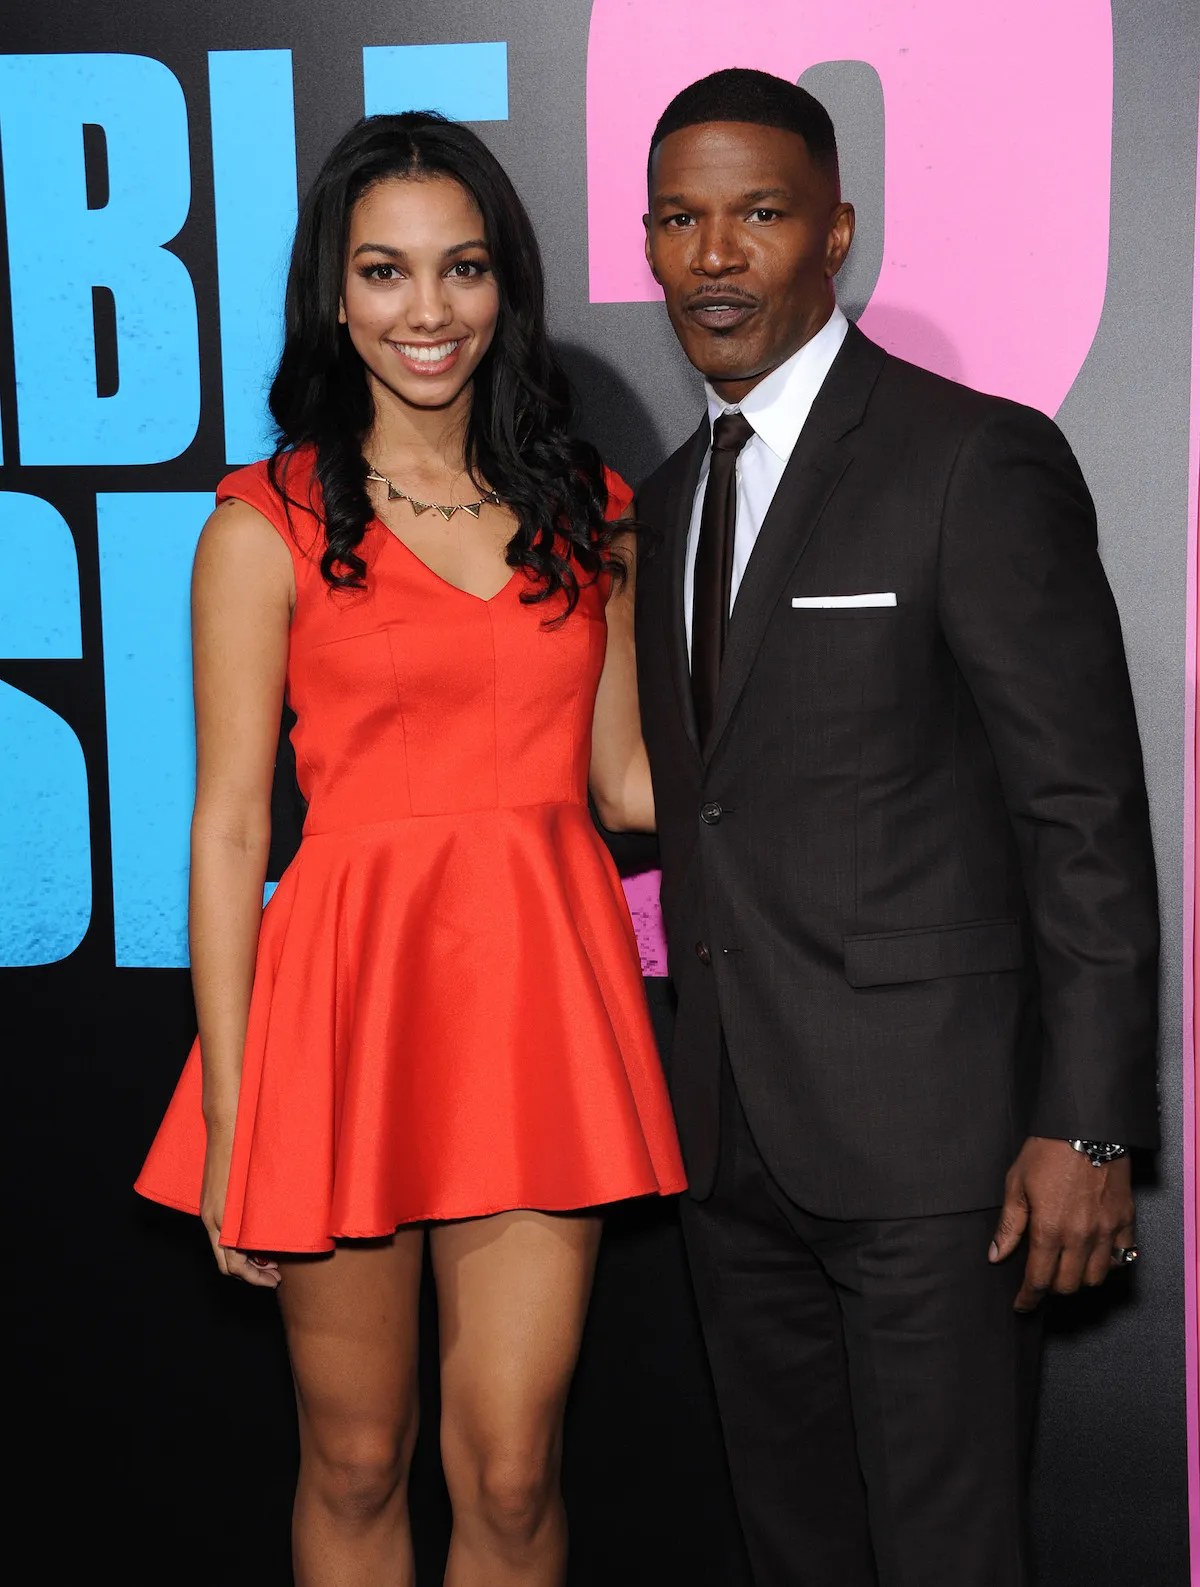 Corinne and Jamie Foxx at 'Horrible Bosses 2' premiere